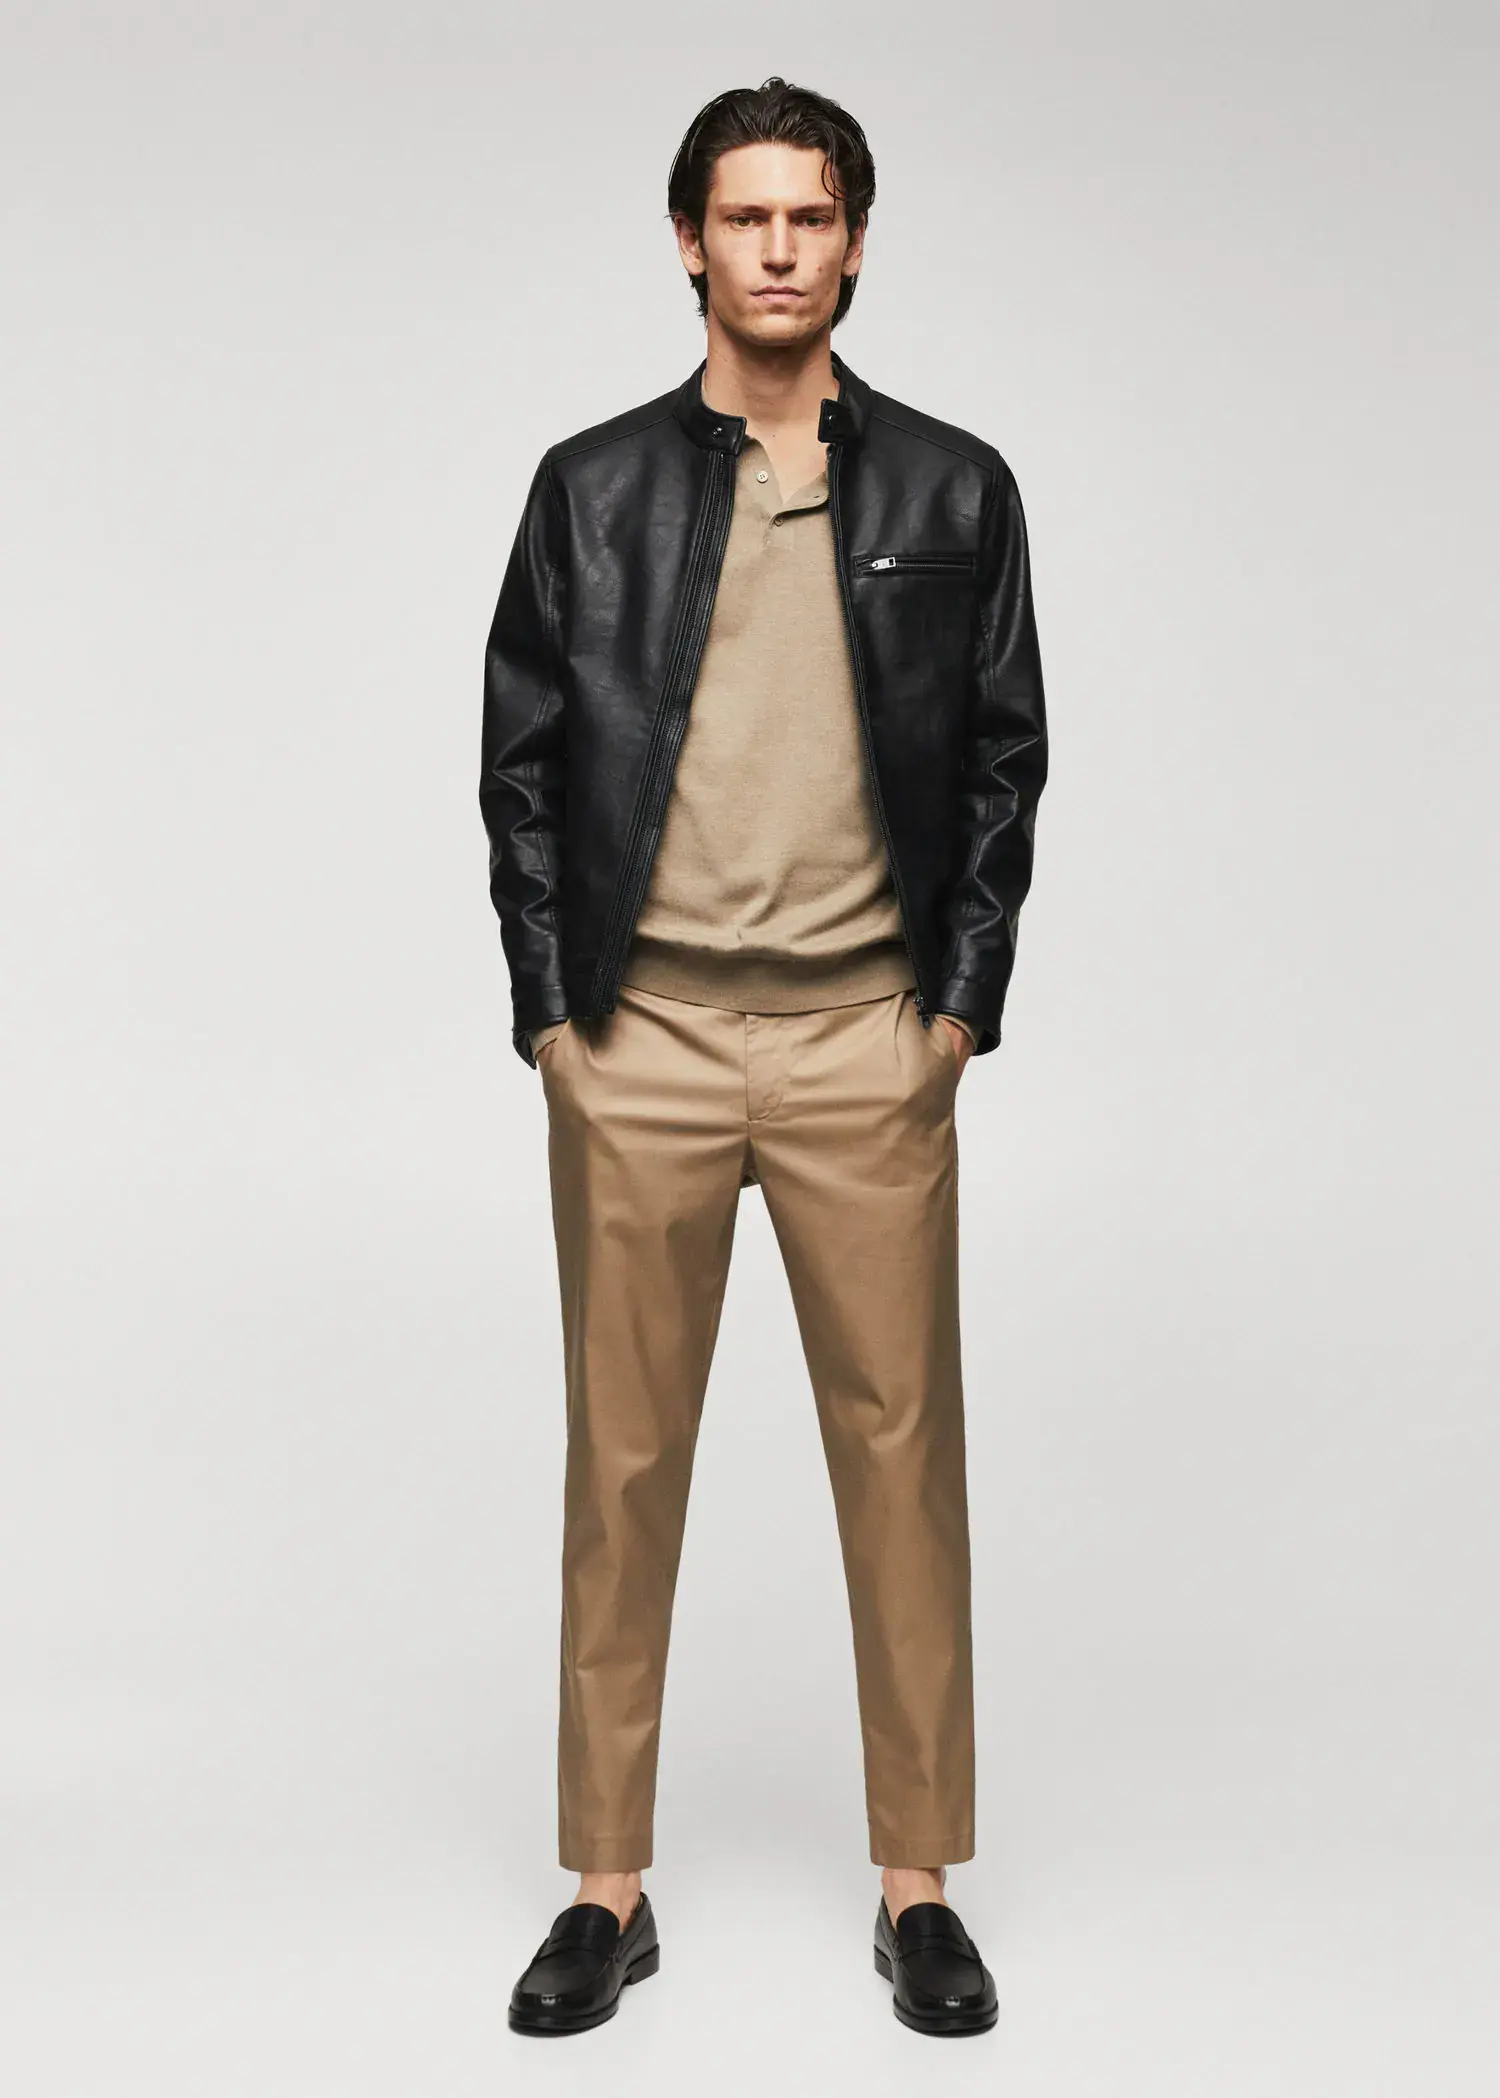 Mango Leather-effect jacket with zippers. a man in a black jacket and tan pants. 